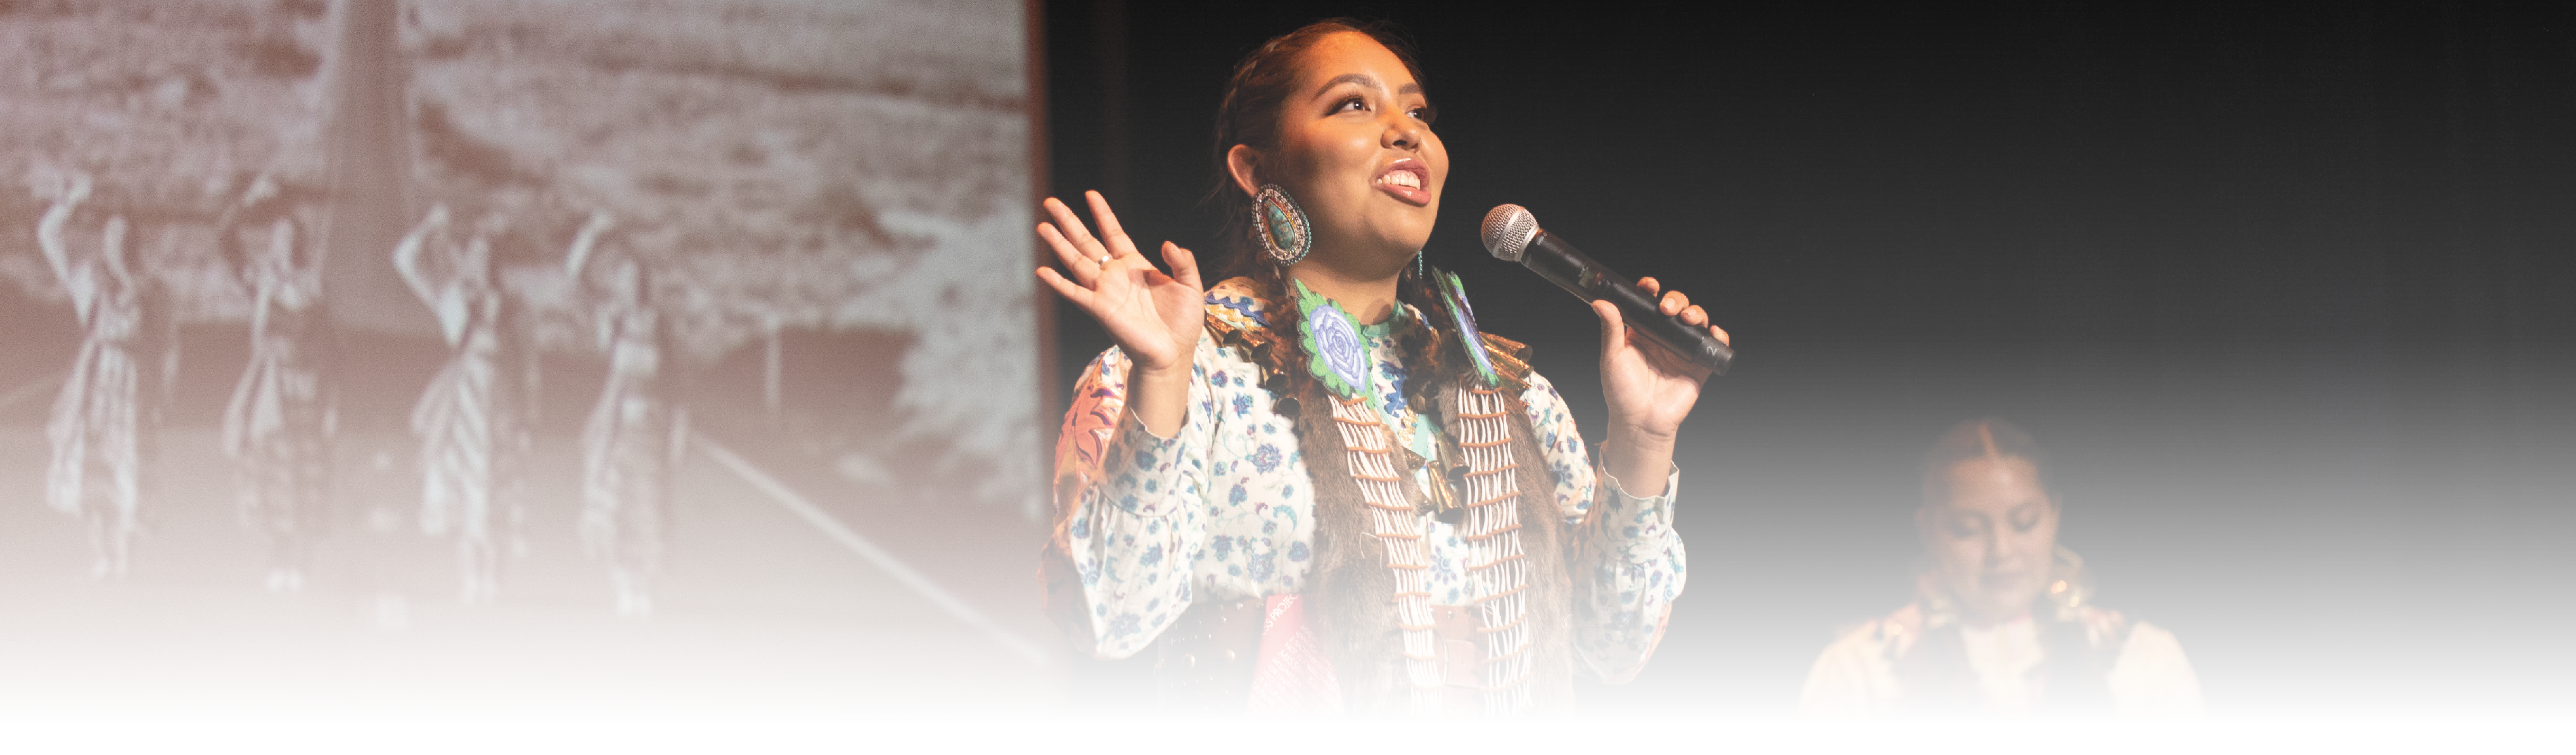 An indigenous woman performs onstage